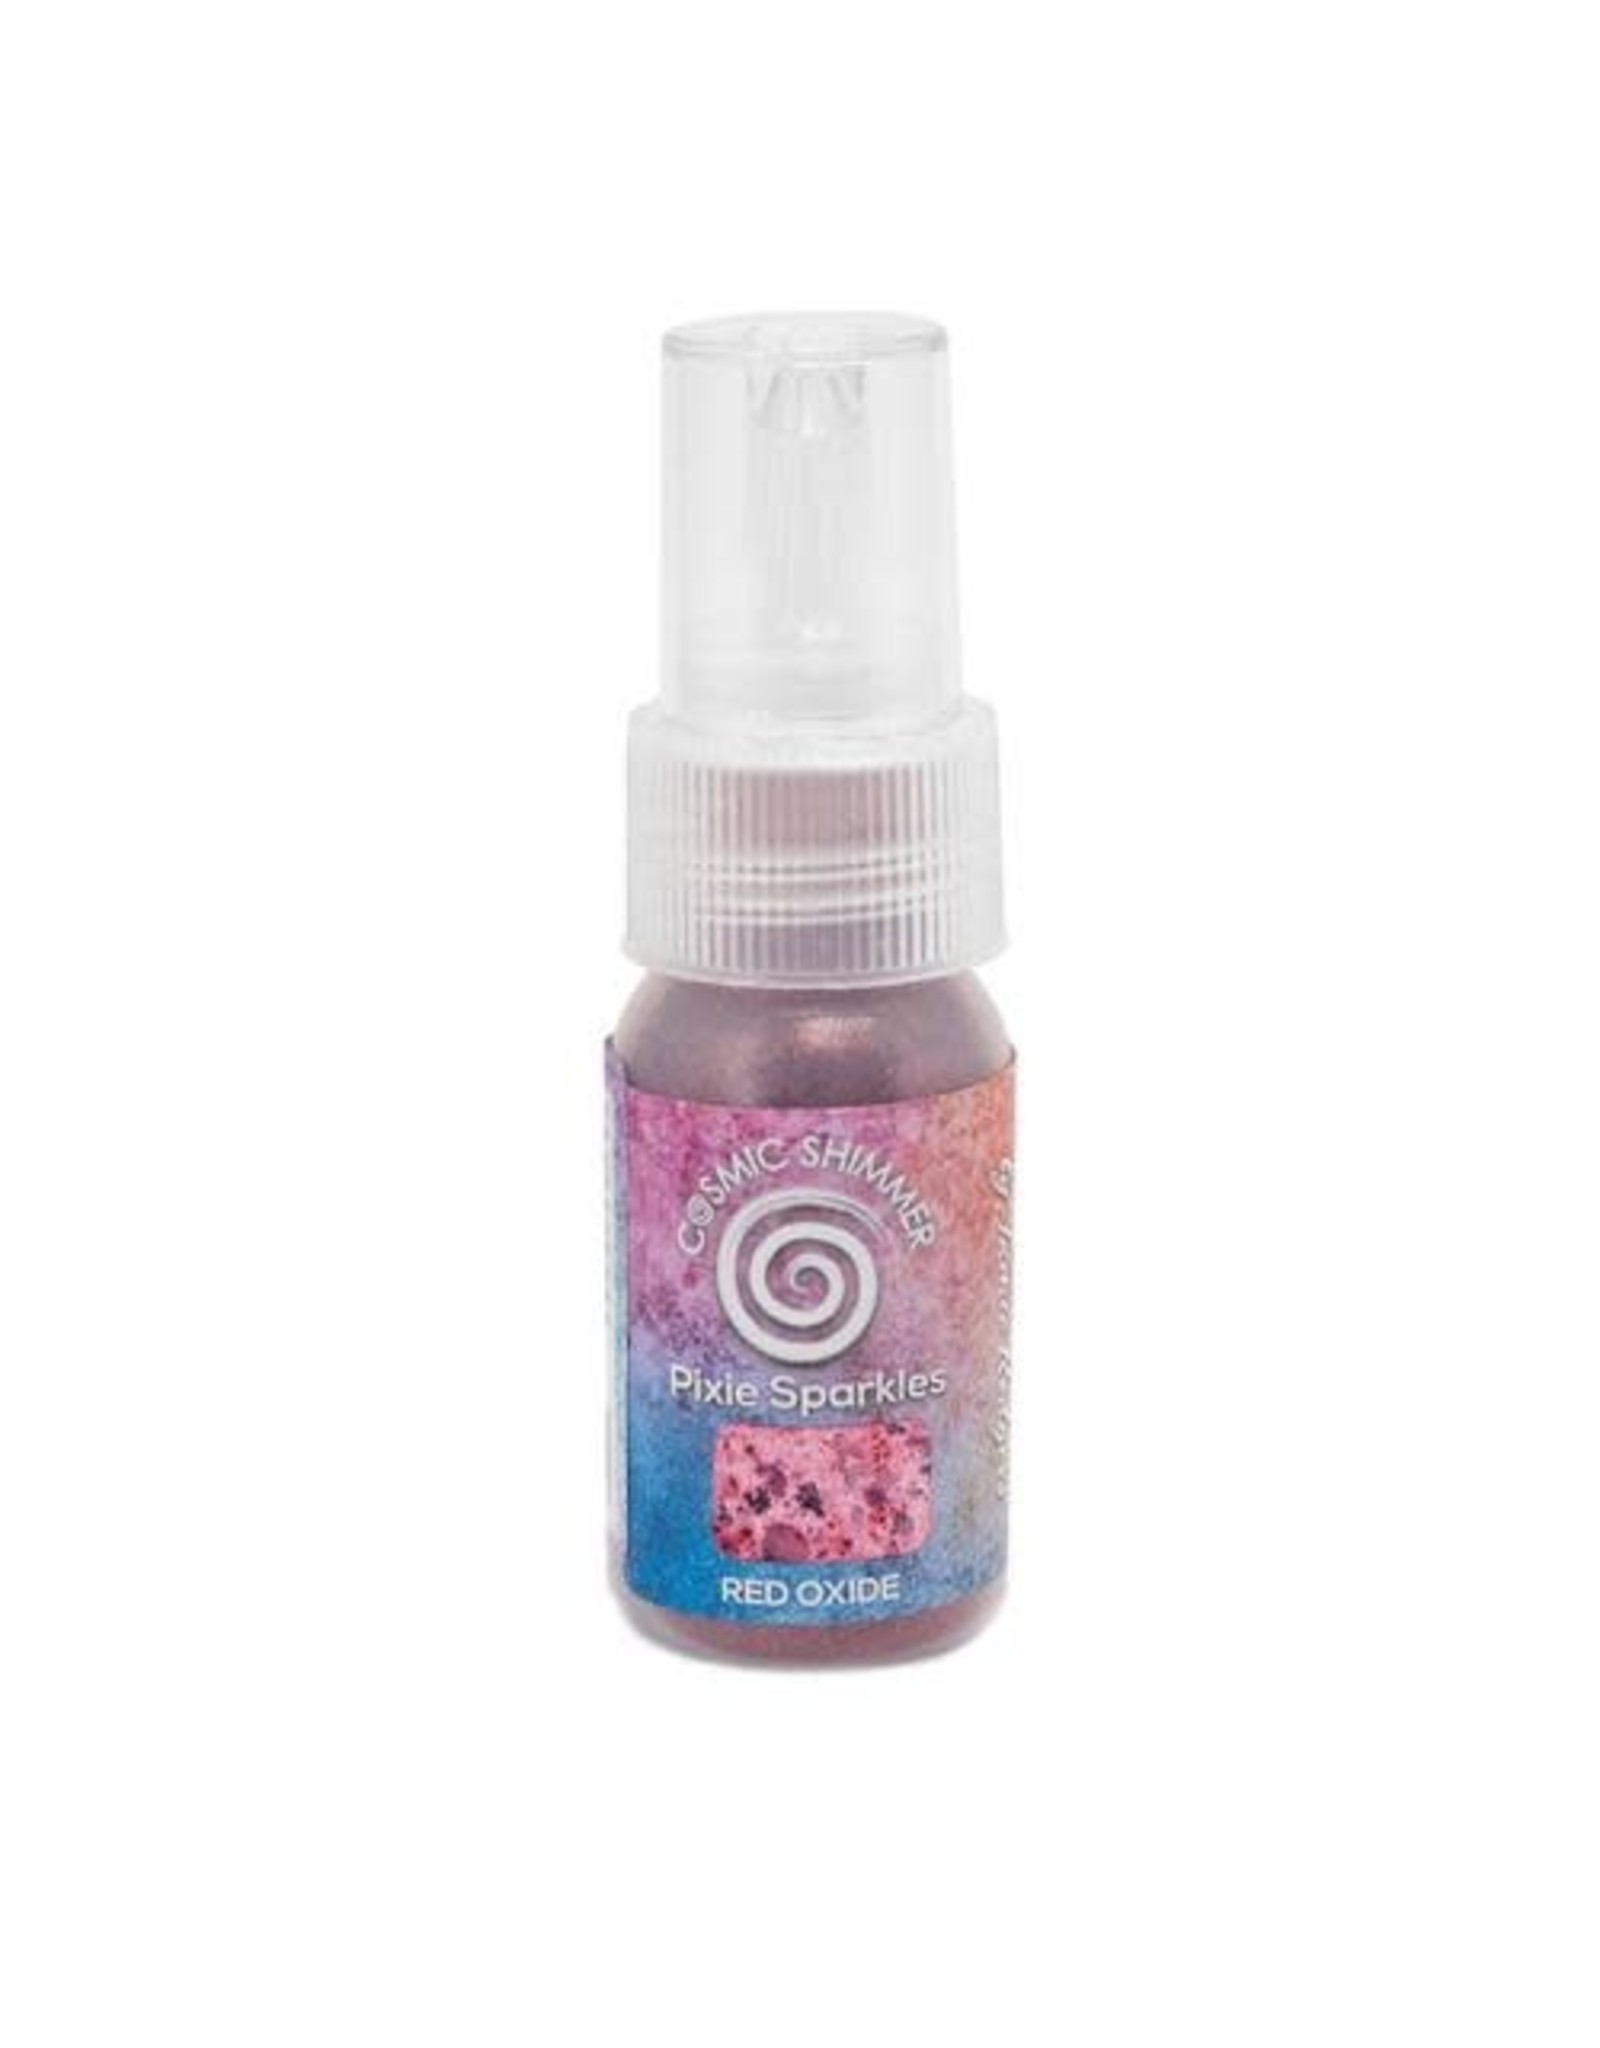 CREATIVE EXPRESSIONS COSMIC SHIMMER JAMIE RODGERS RED OXIDE PIXIE SPARKLES 30ML